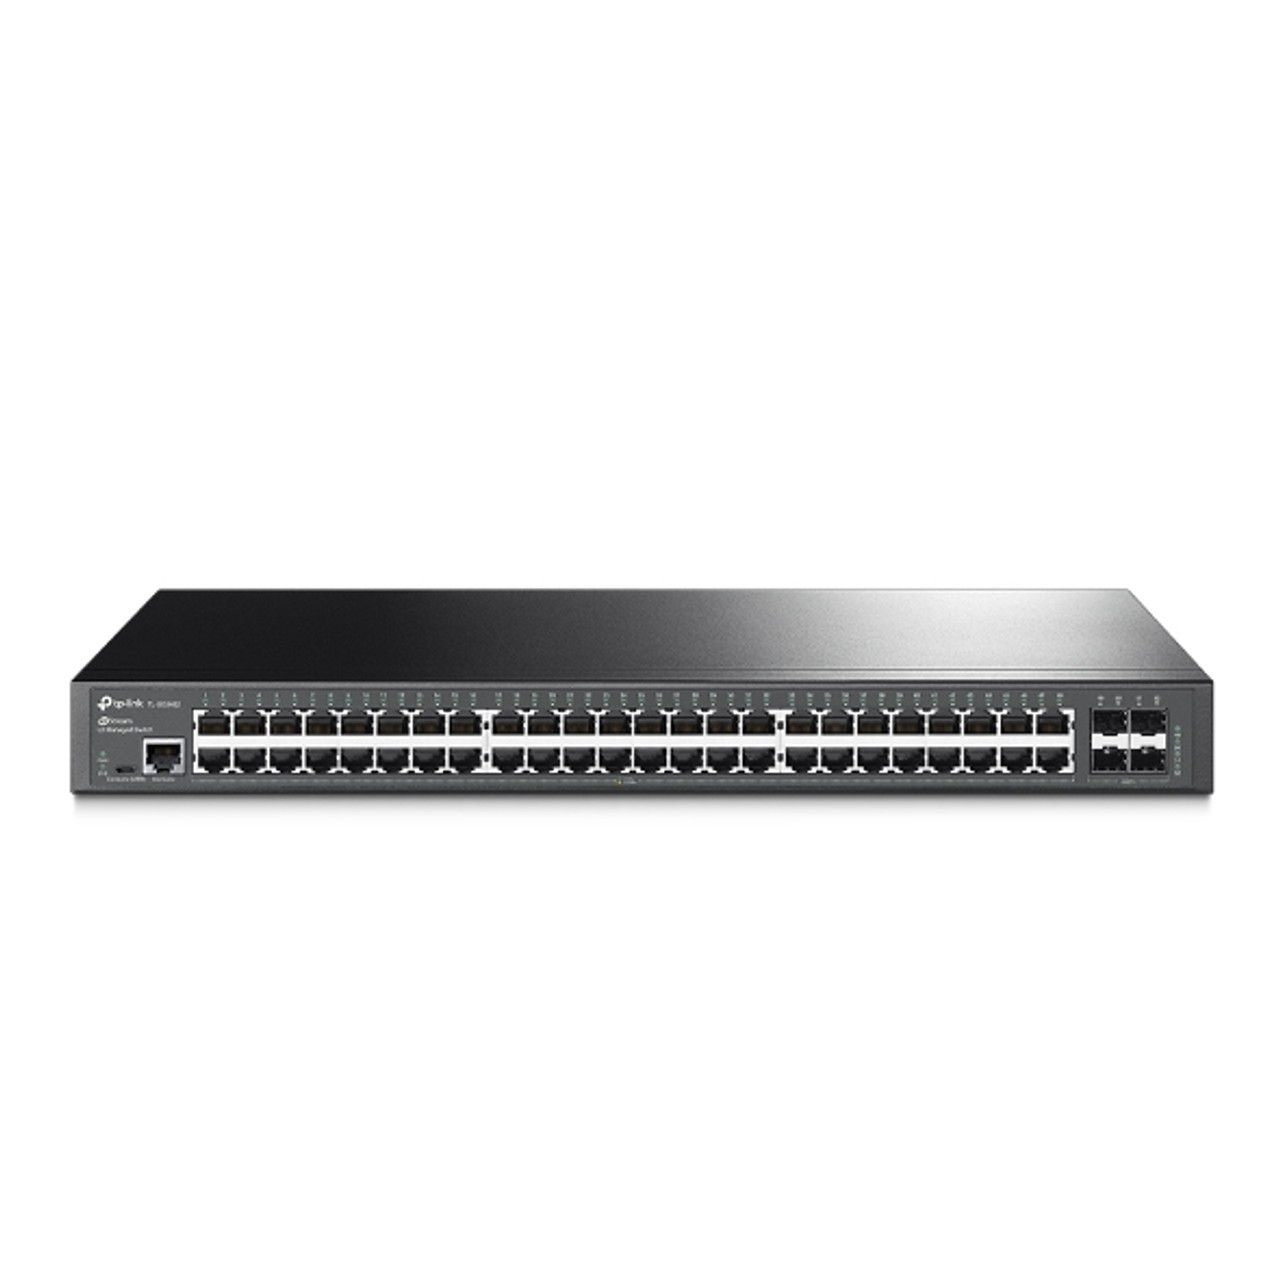 TP-LINK TL-SG3452 Routing with Gigabit shop JetStream SHOP Management, SDN, L2 Centralised (L-NWTL-SG3452) Integrated at Slots, 48-Port Switch into Static Managed Omada 4 SFP AUSTiC